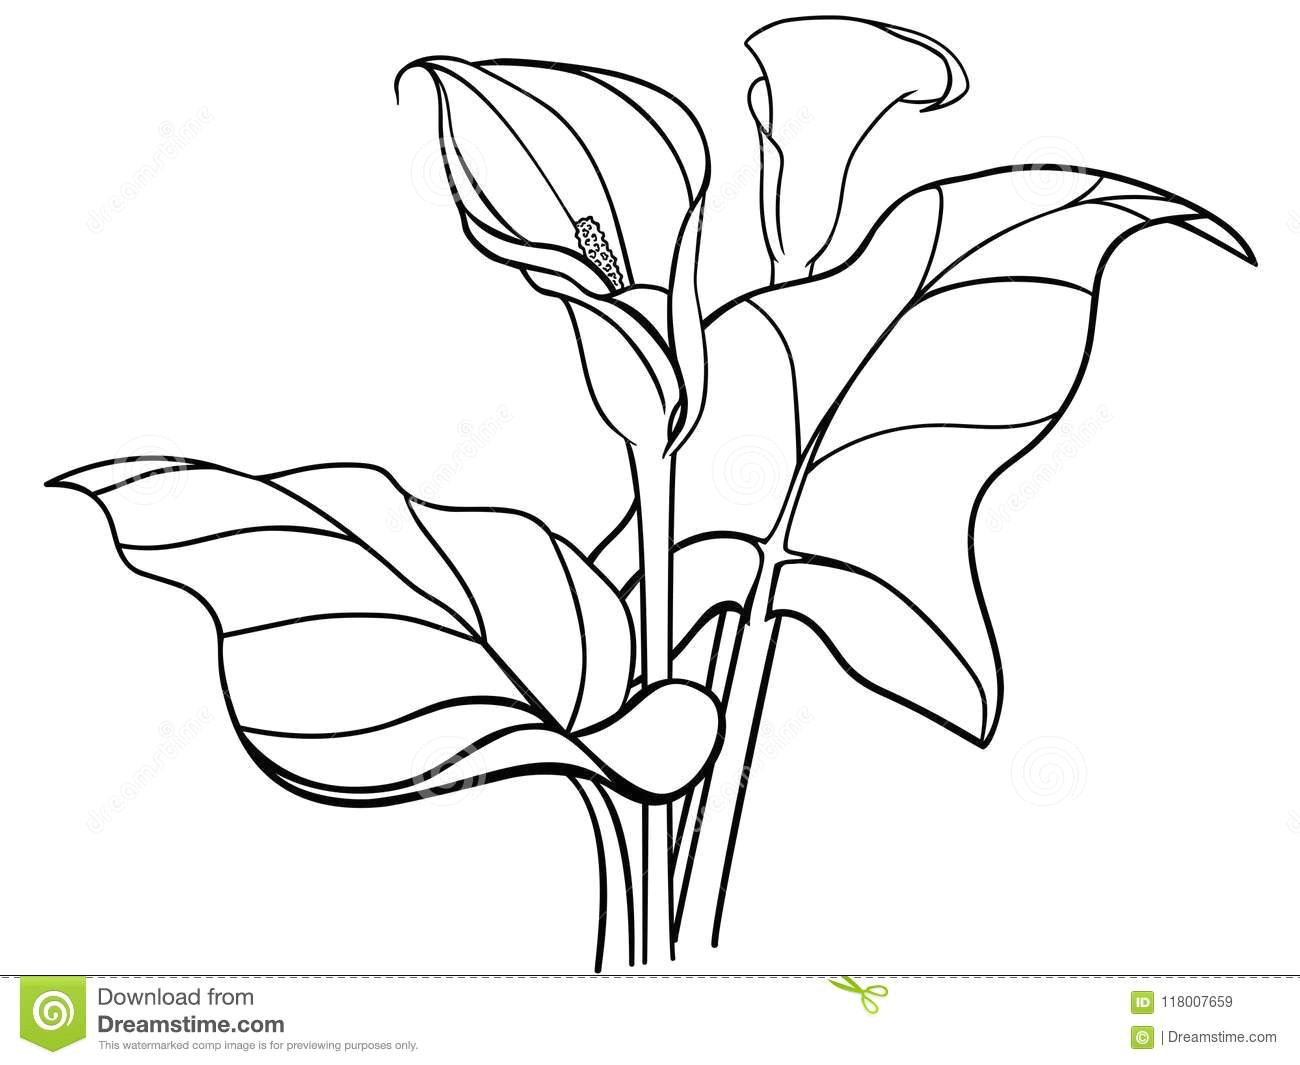 Drawings Of Flowers with Leaves Callas Flowers with Leaves Bouquet White Callas Lilies Line